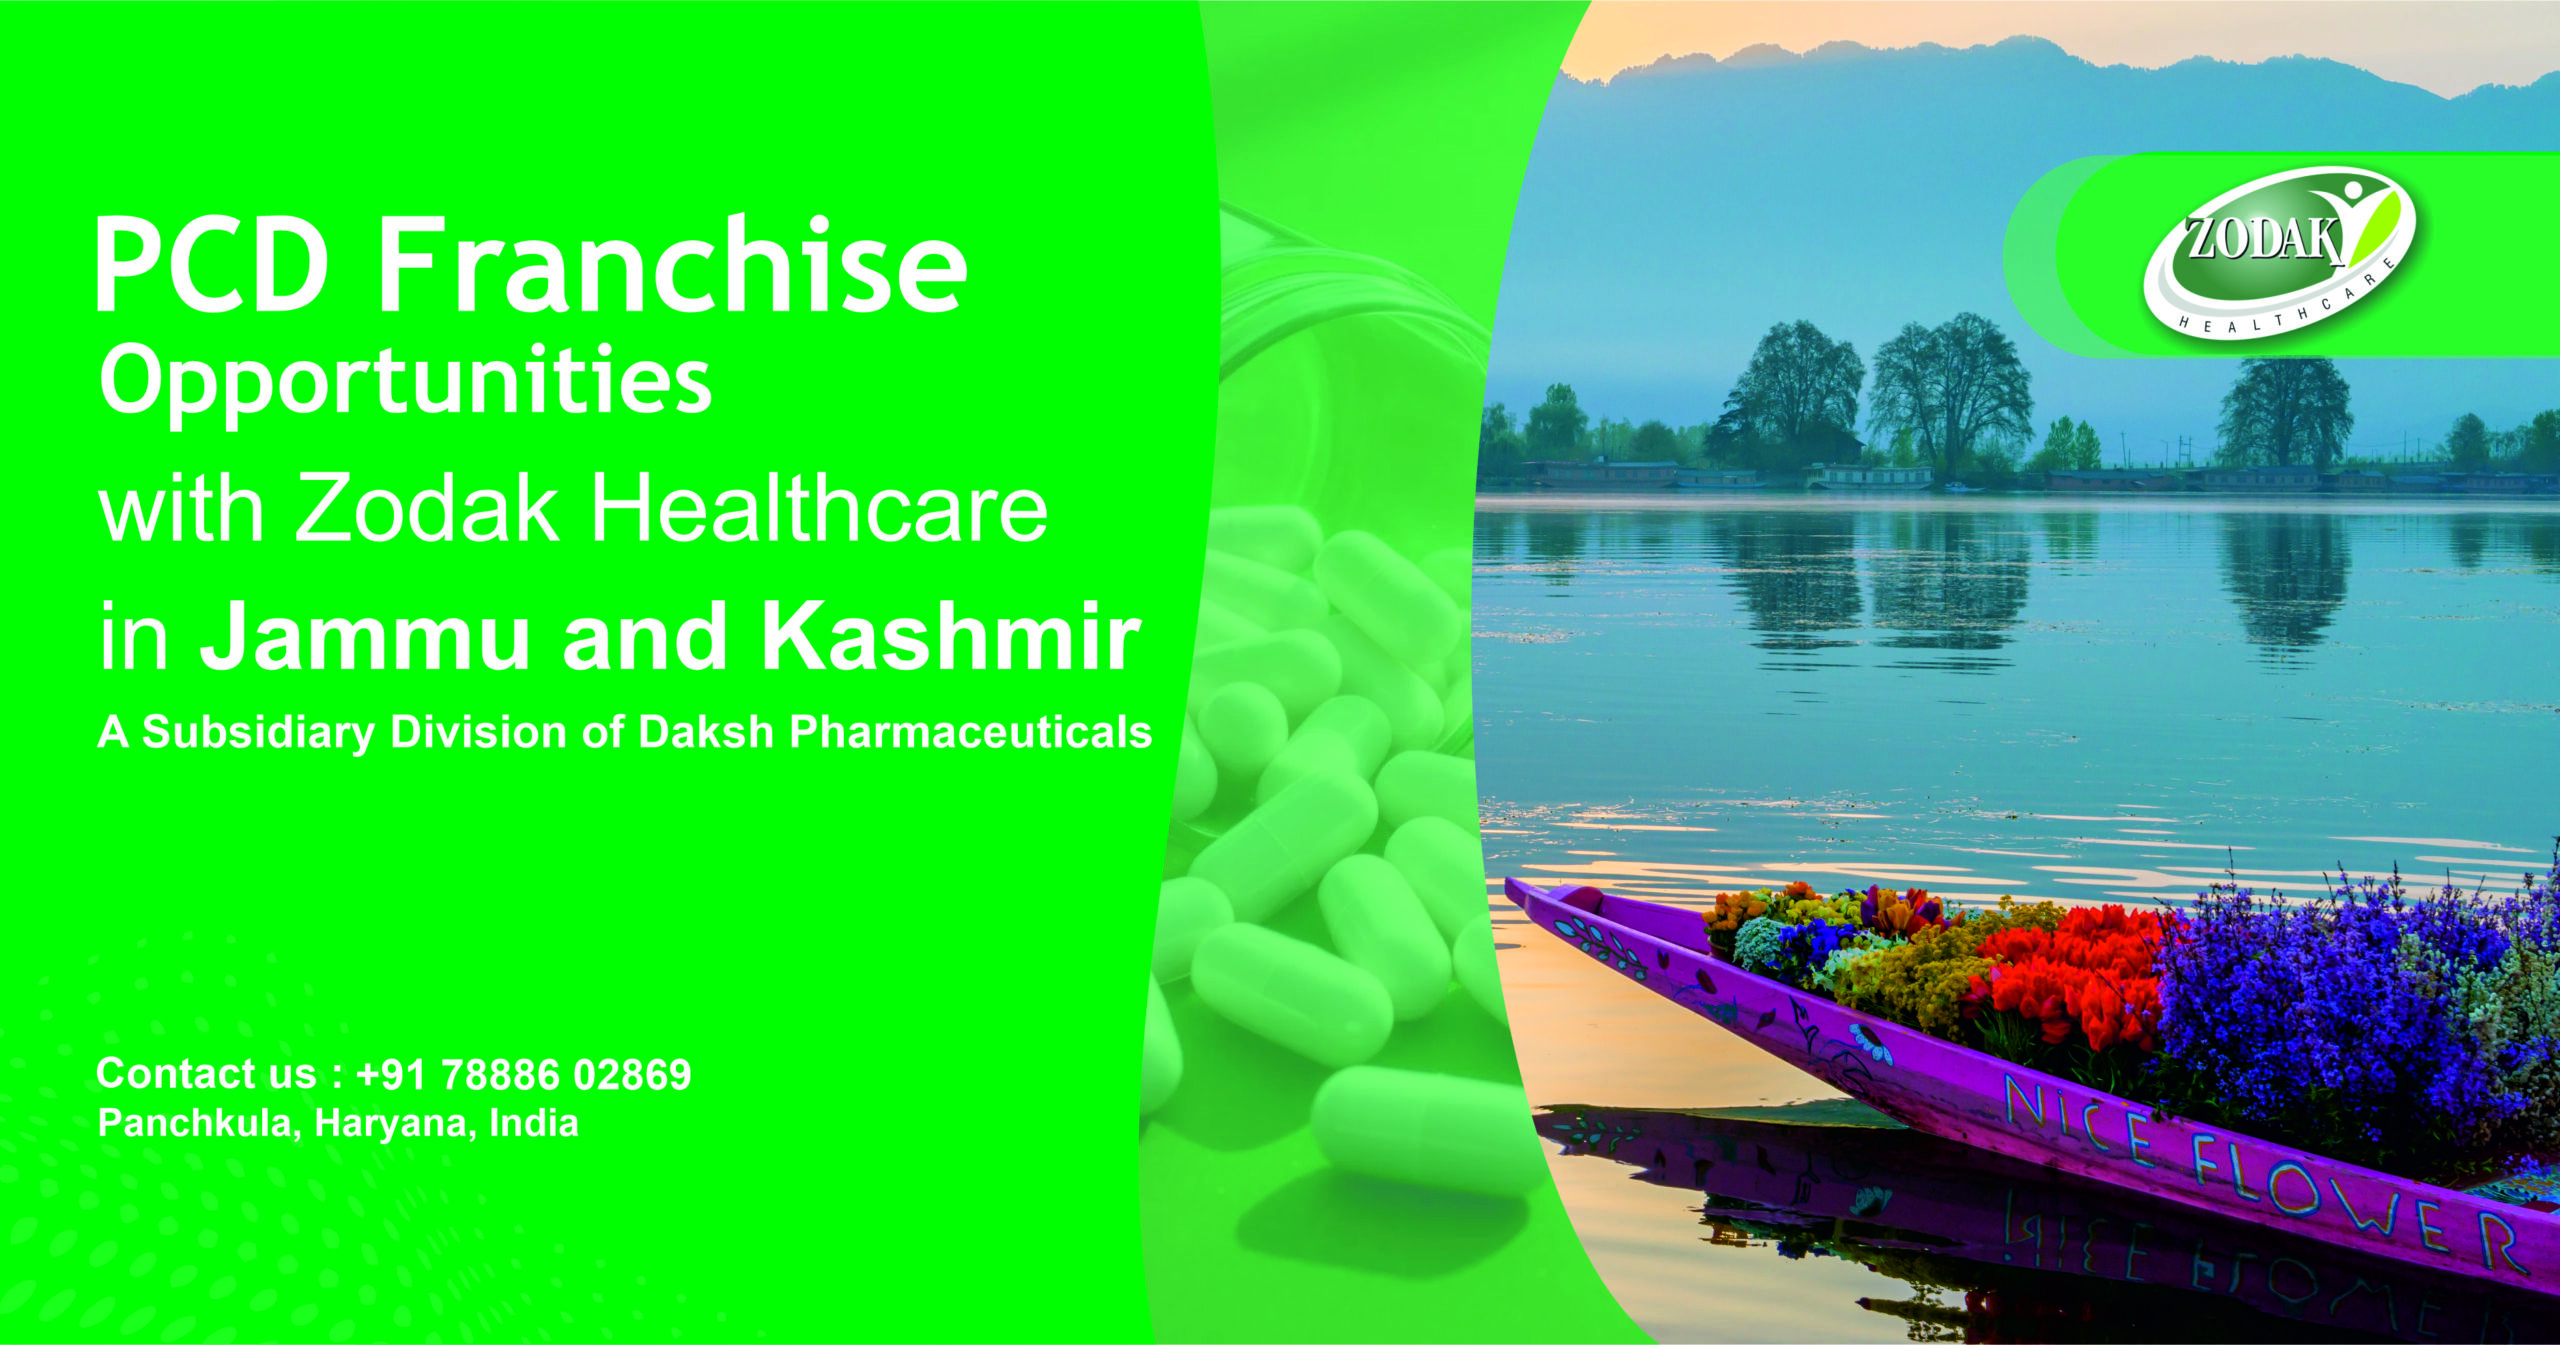 PCD Franchise Opportunities with Zodak Healthcare in Jammu and Kashmir